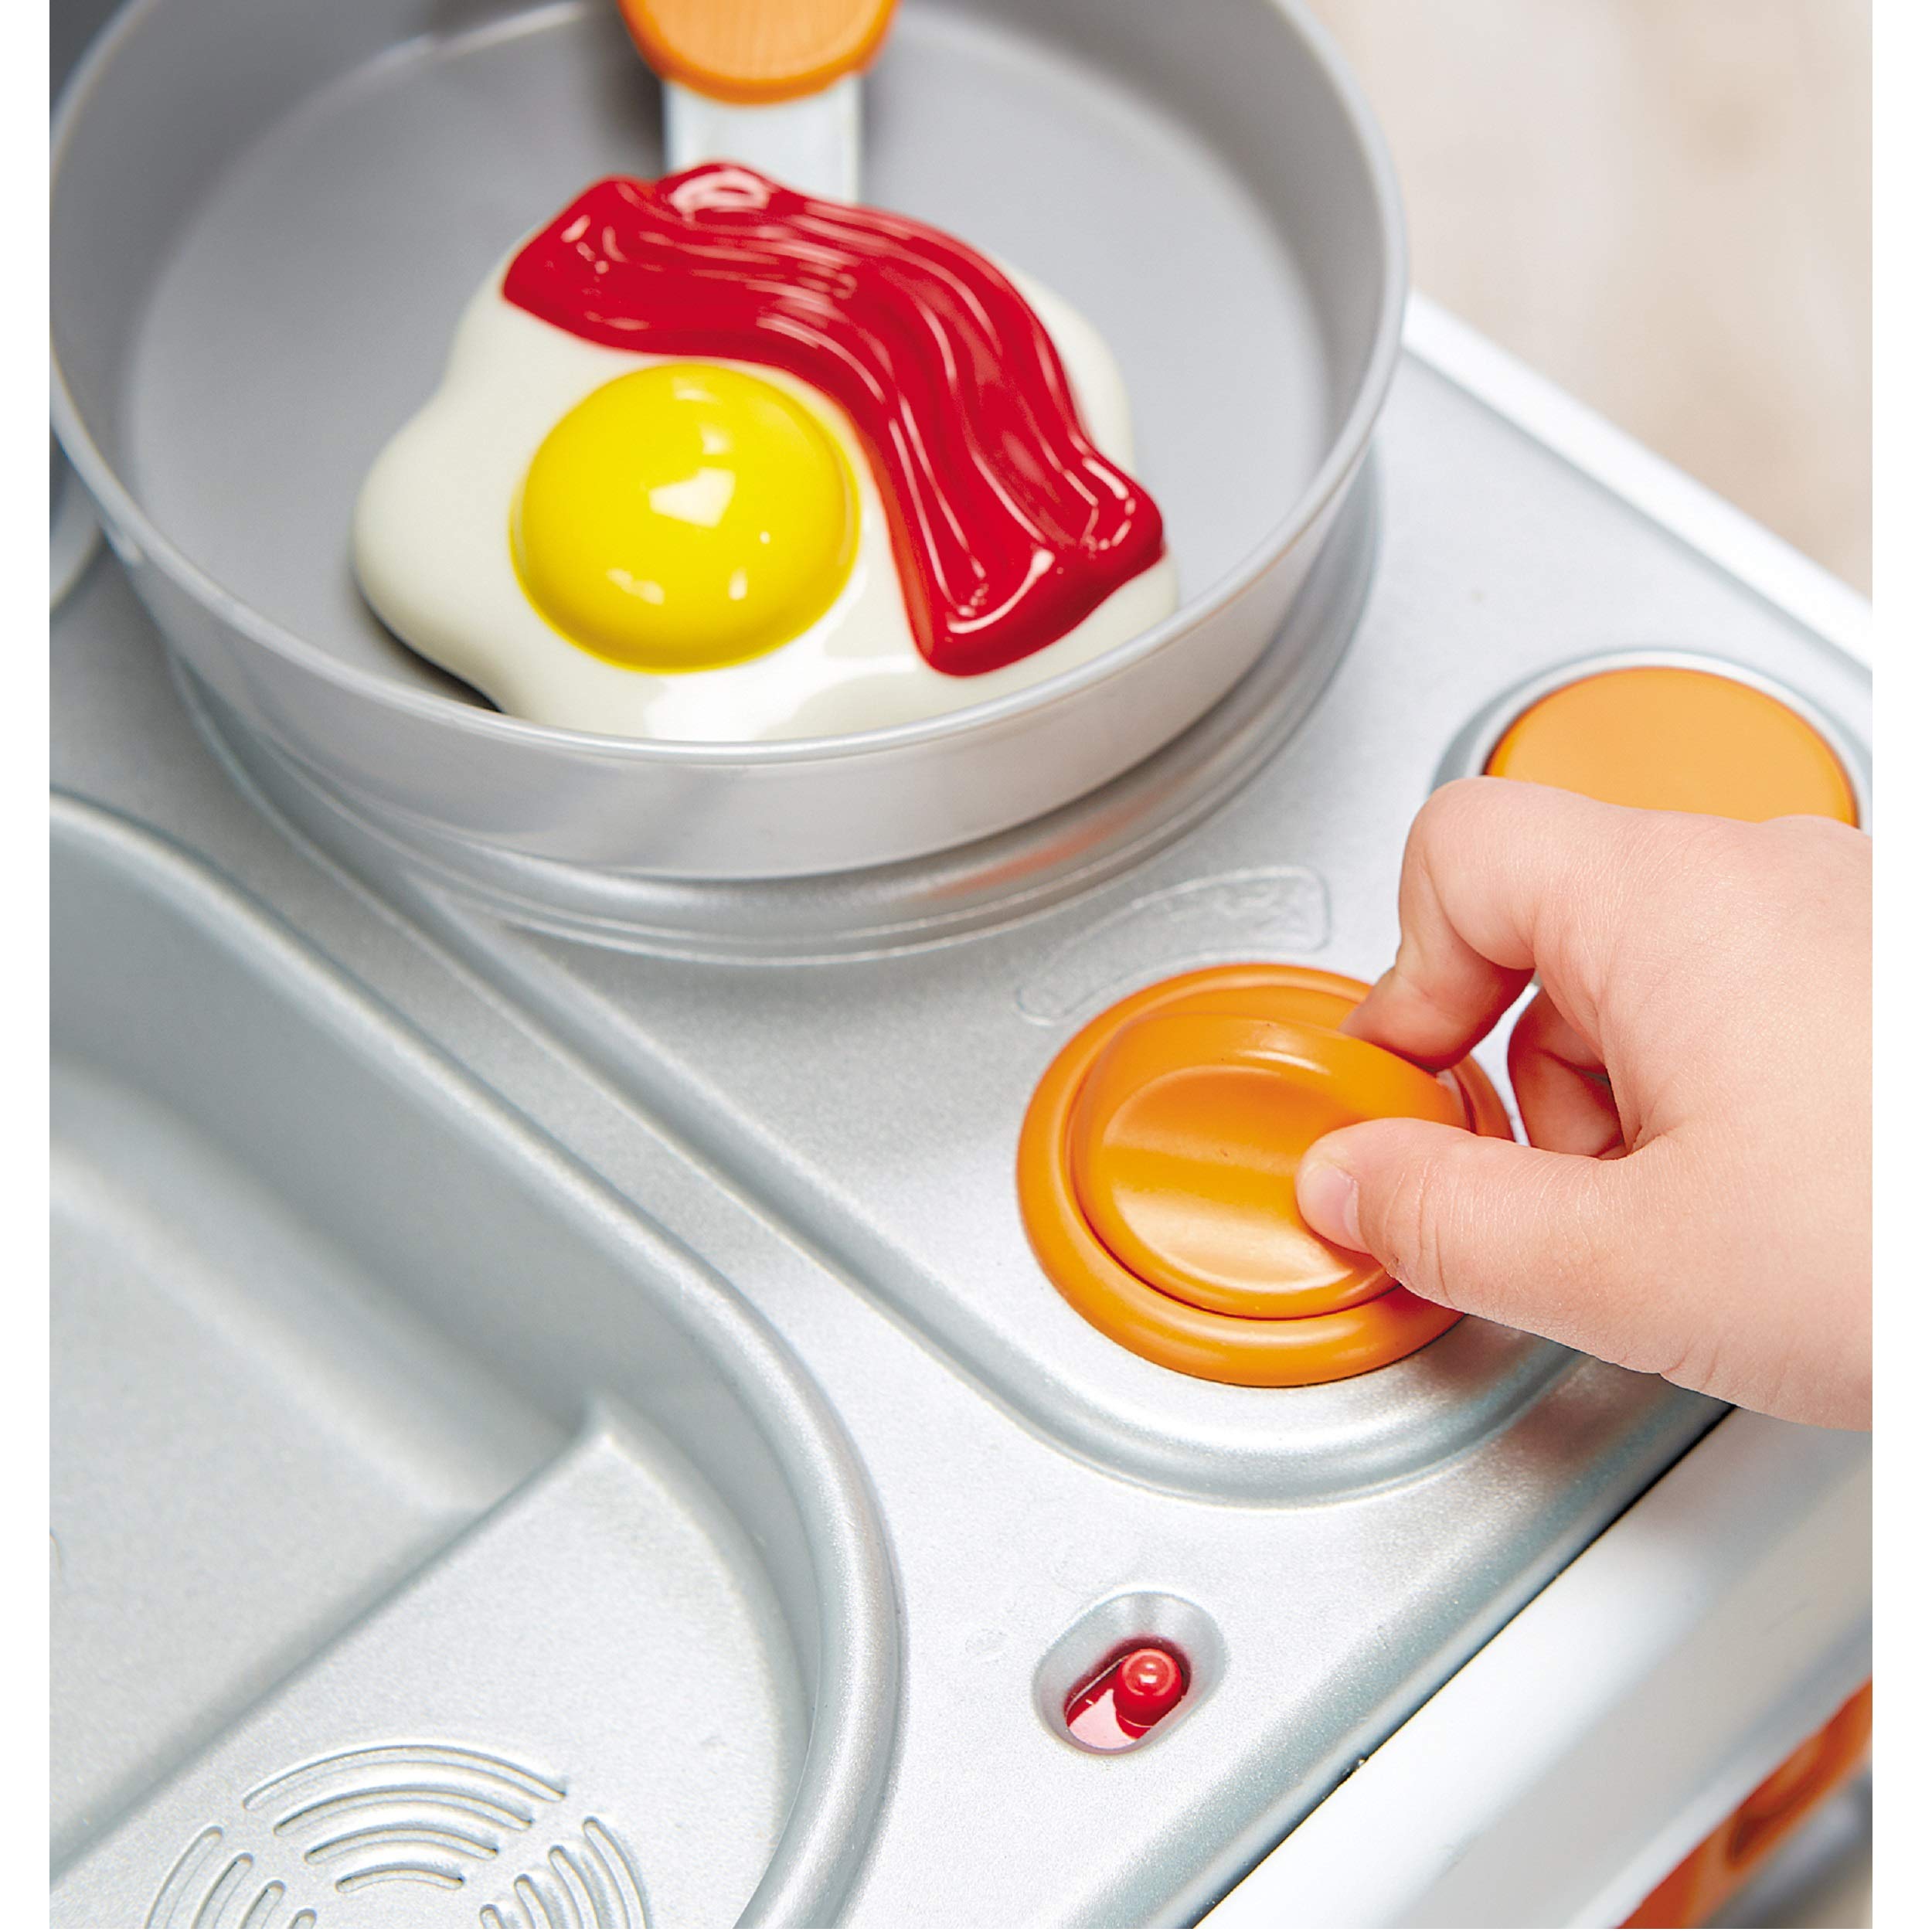 Little Tikes Home Grown Kitchen - Role Play Realistic Kitchen Real Cooking & Water Boiling Sounds Kitchen Accessories Set for Girls Boys - Multicolor 22 x 18 x 30.25 inches